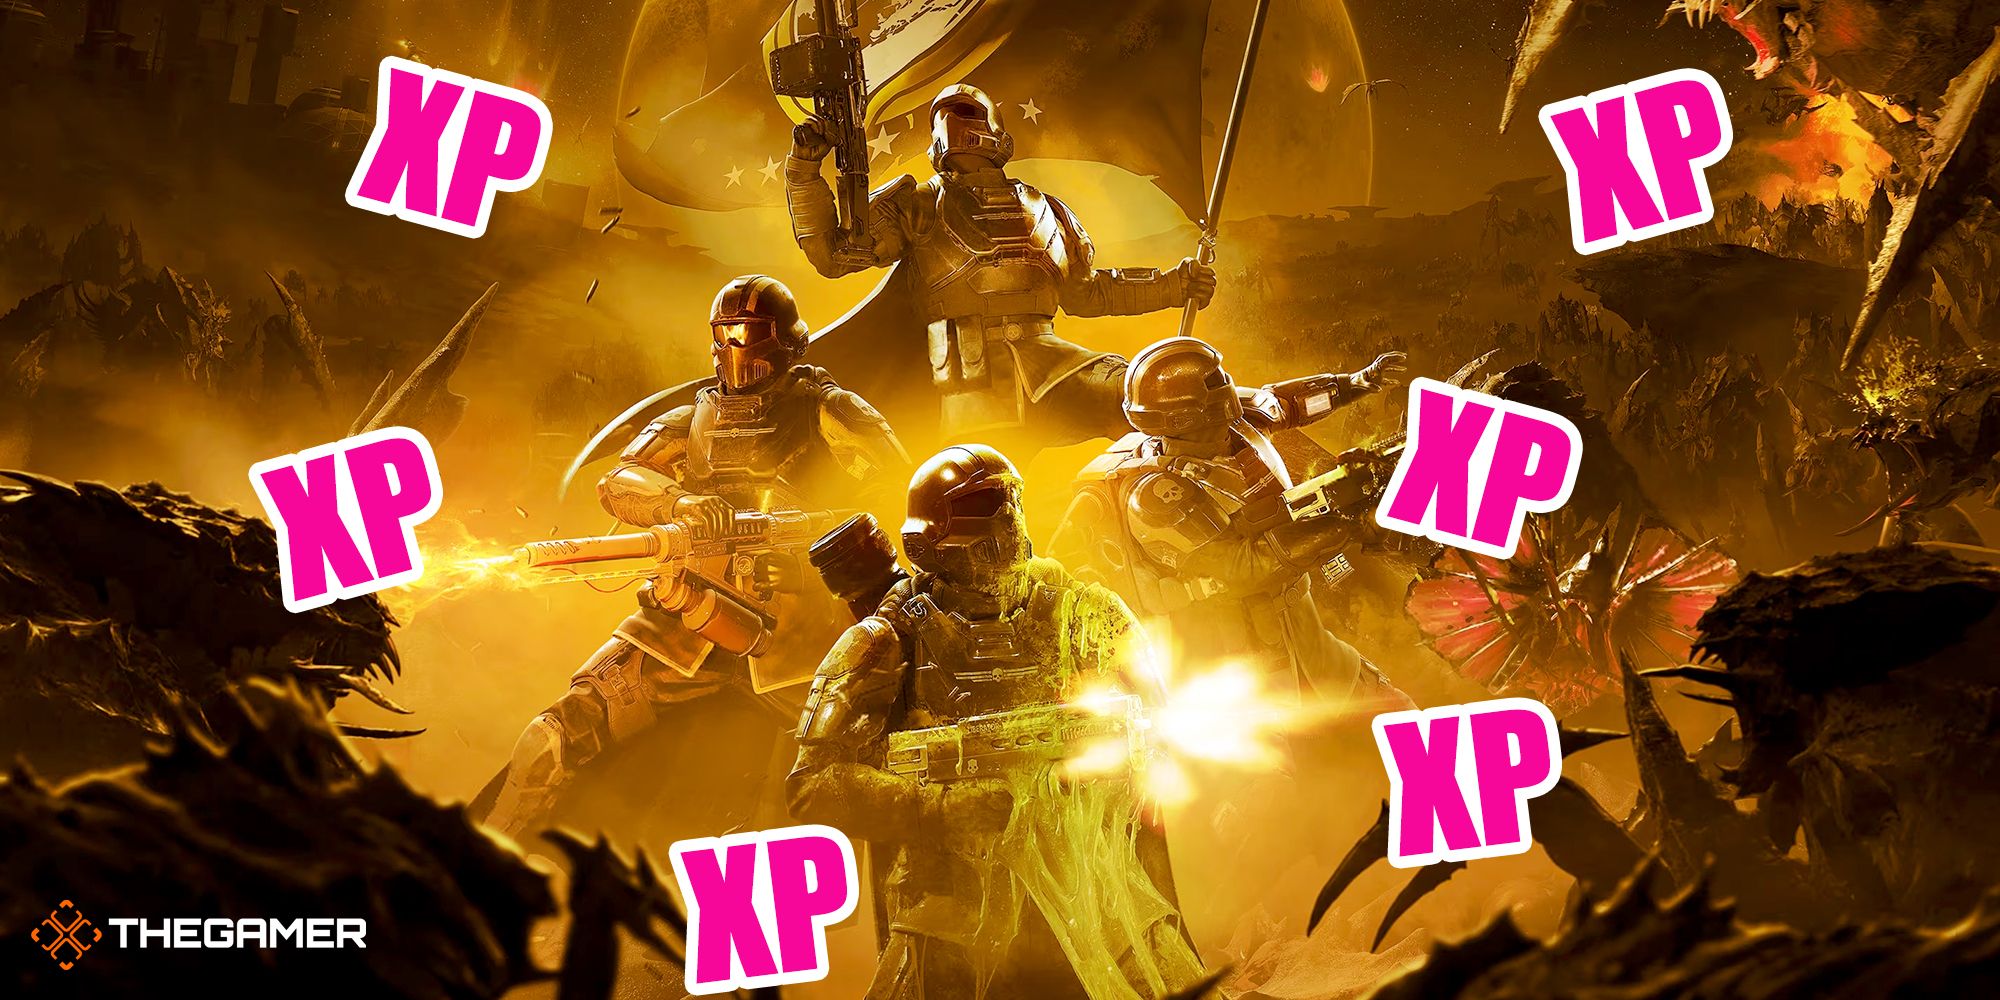 A squad of Helldivers fending off Terminids, with XP in pink font and outlined in white scattered around the image